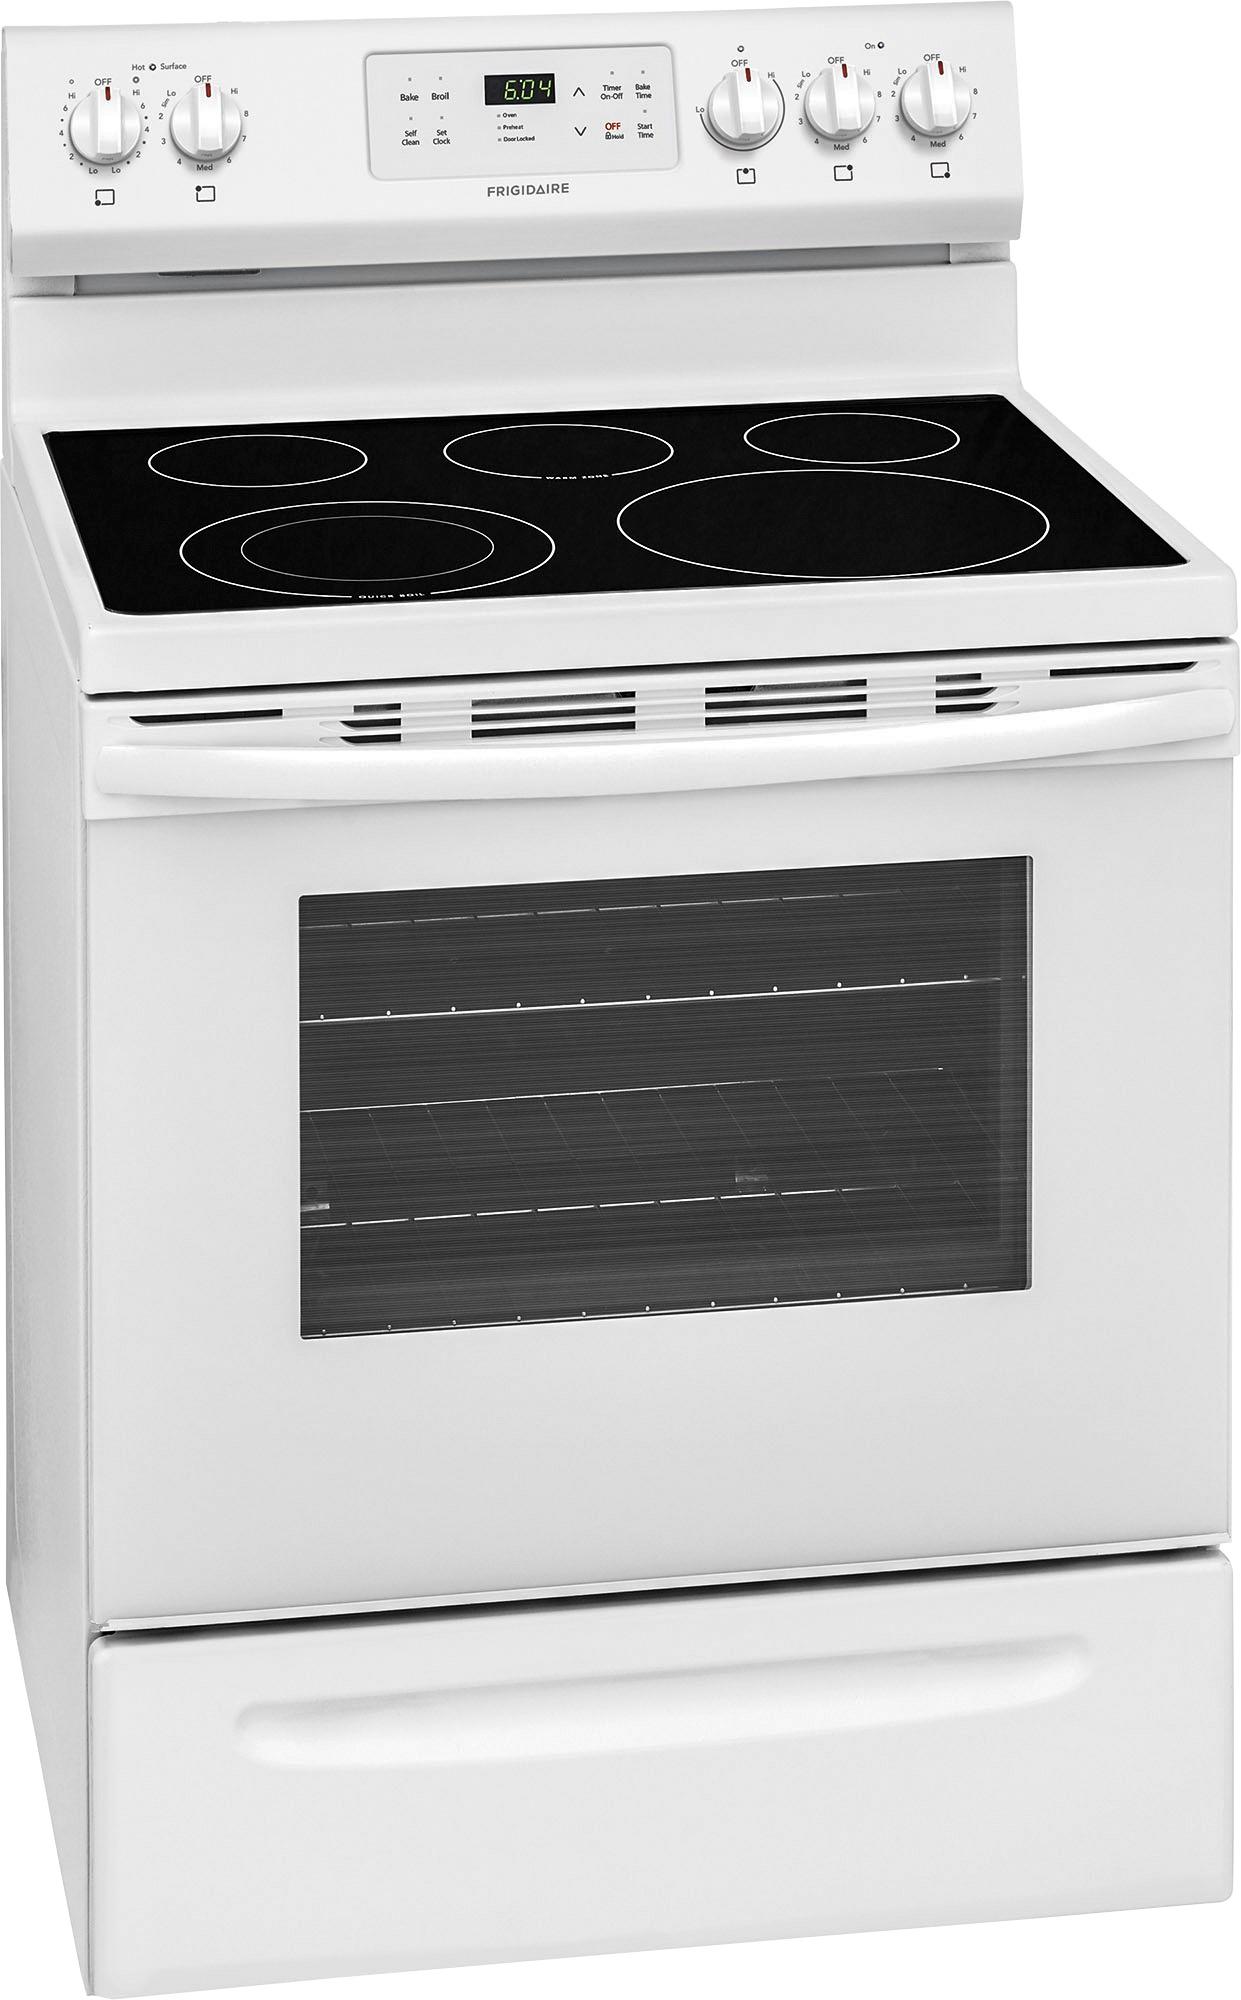 Angle View: Frigidaire - 5.3 Cu. Ft. Self-Cleaning Freestanding Electric Range - Black stainless steel